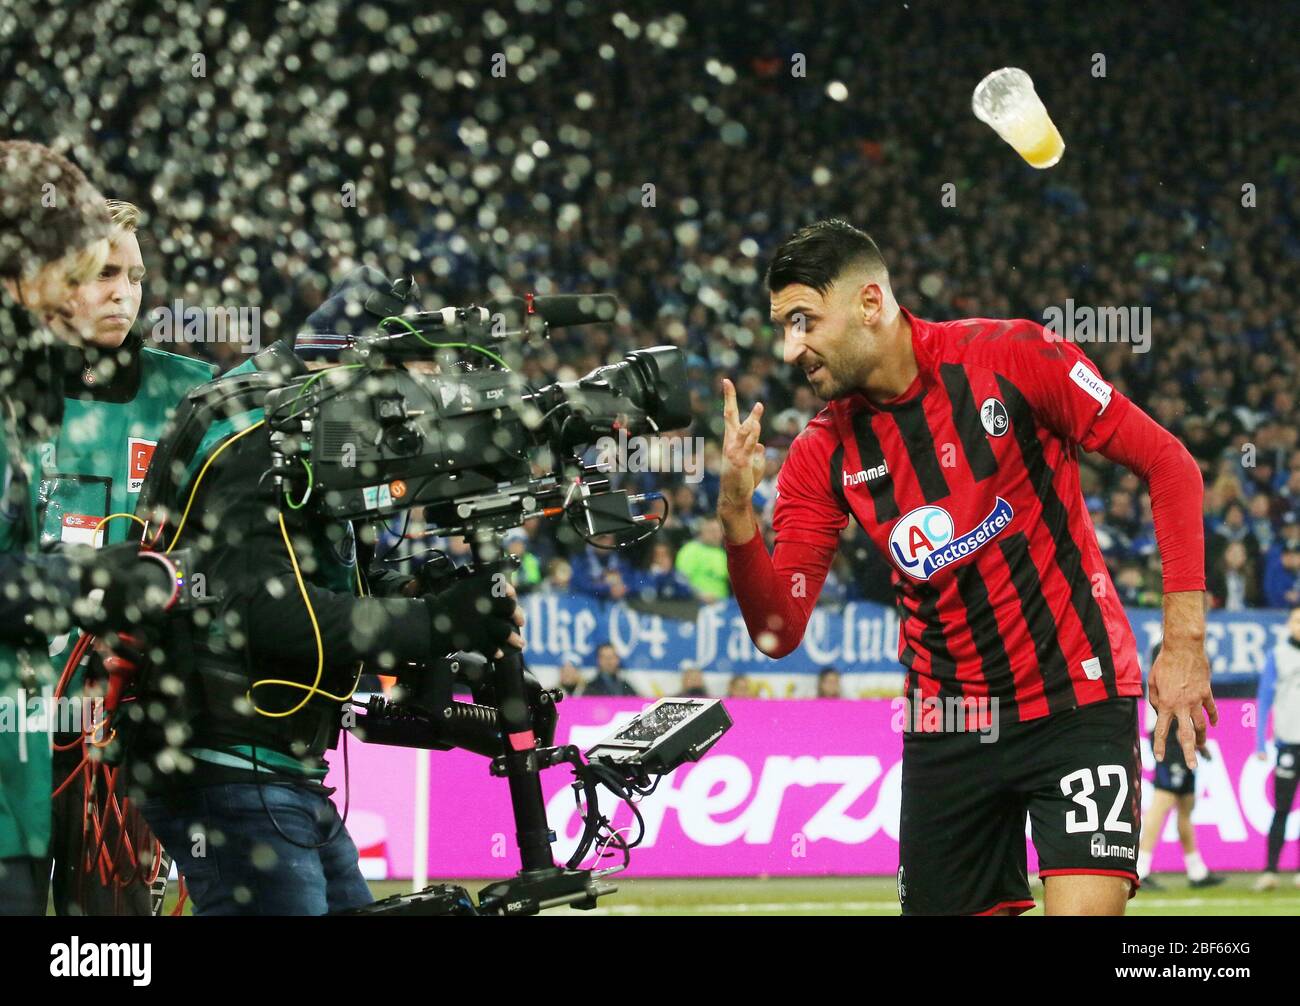 Sky Tv Camera Football High Resolution Stock Photography And Images Alamy